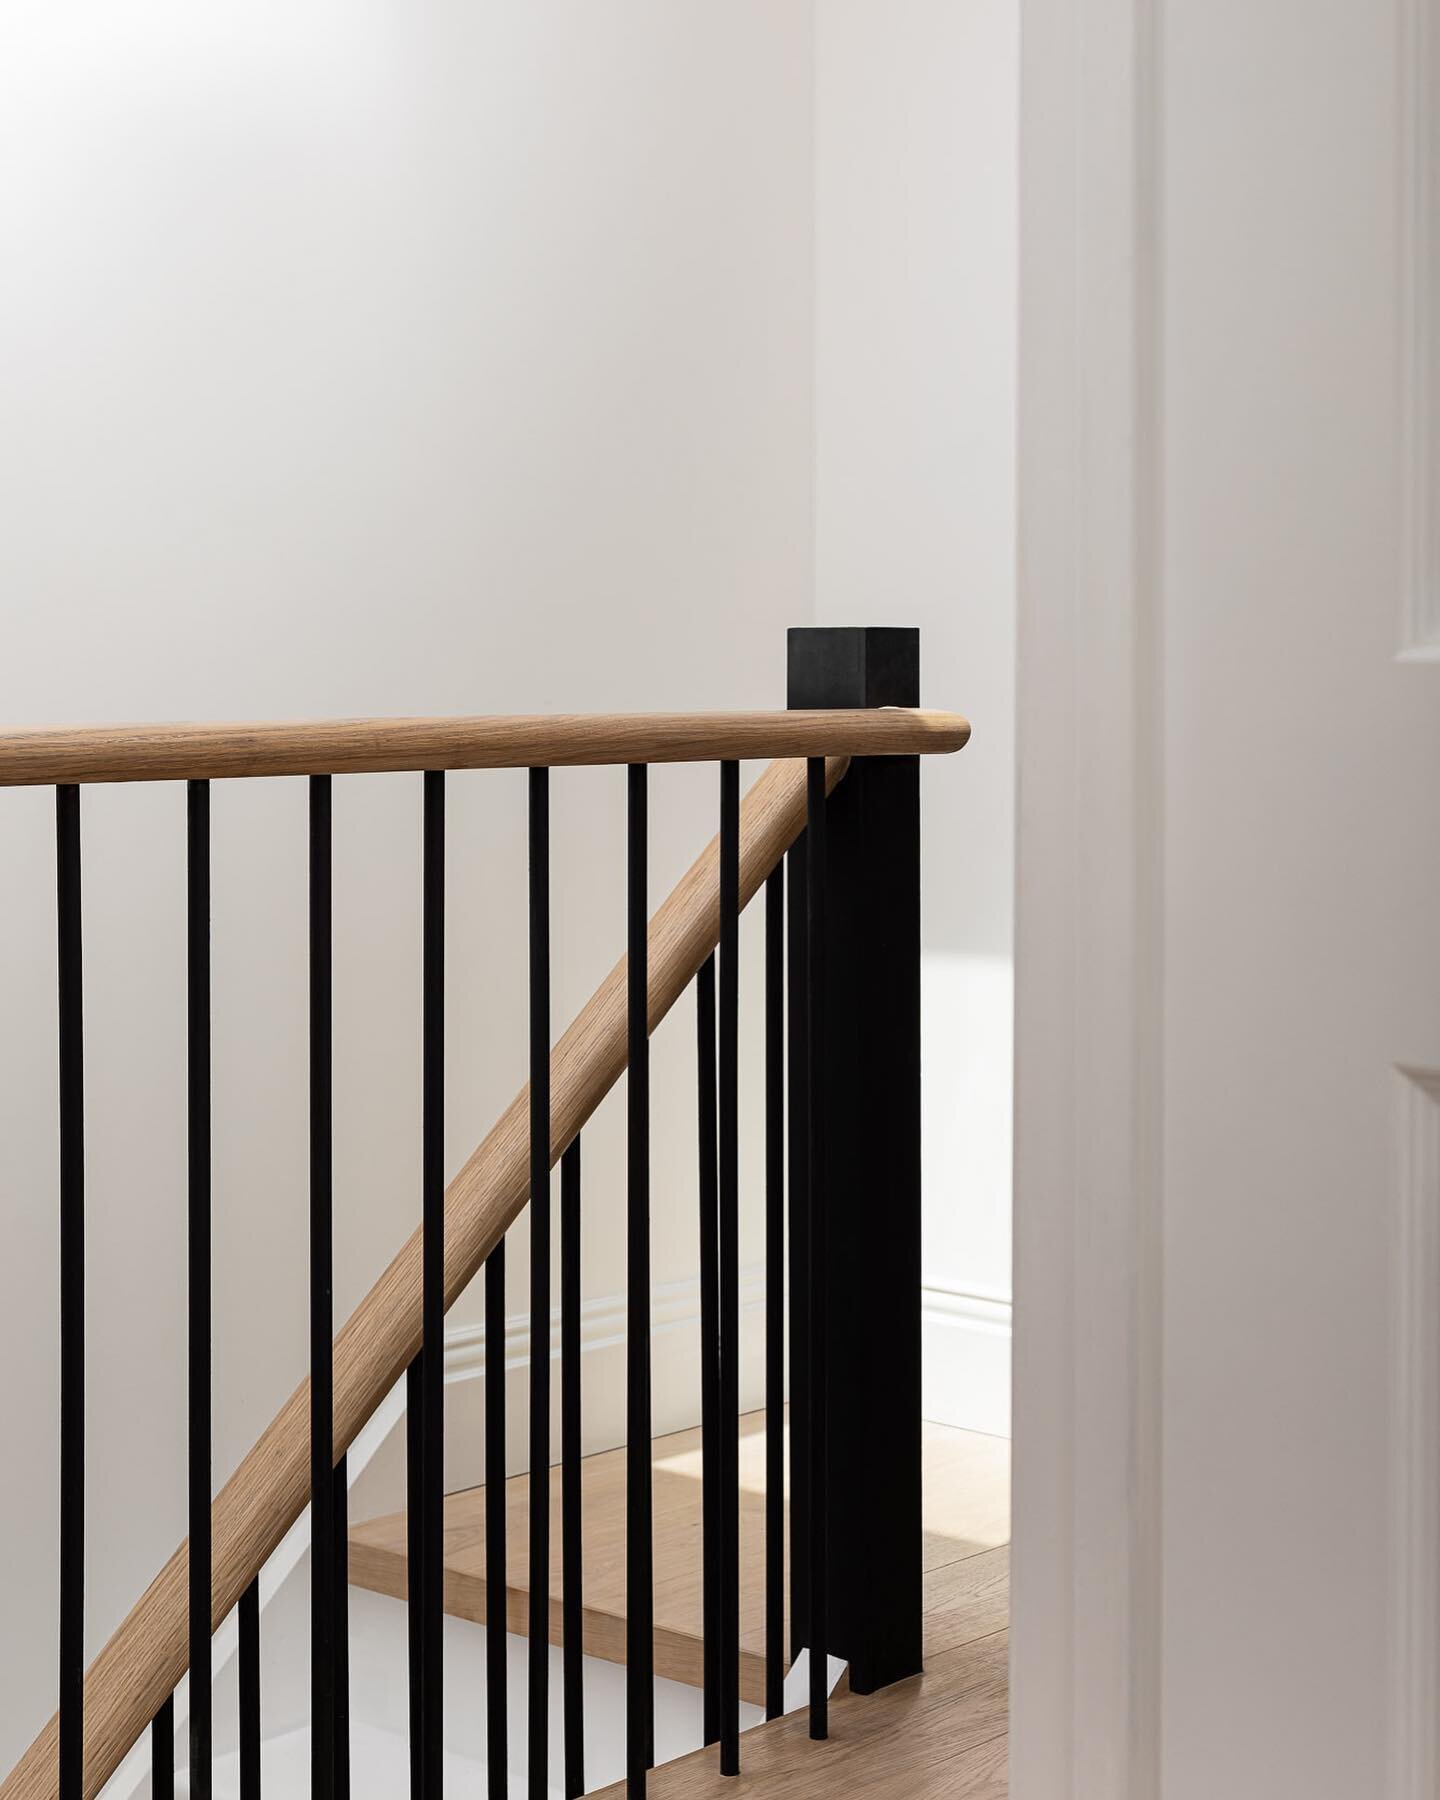 Bespoke balustrade at our 28AR project 

Design: KOH Architects 
Photography: @dnbutlr 

#stairs #balustrade #interiordesign #interiors #interiordetails #architecture #archdaily #archilover #renovation #residential #londonproperty